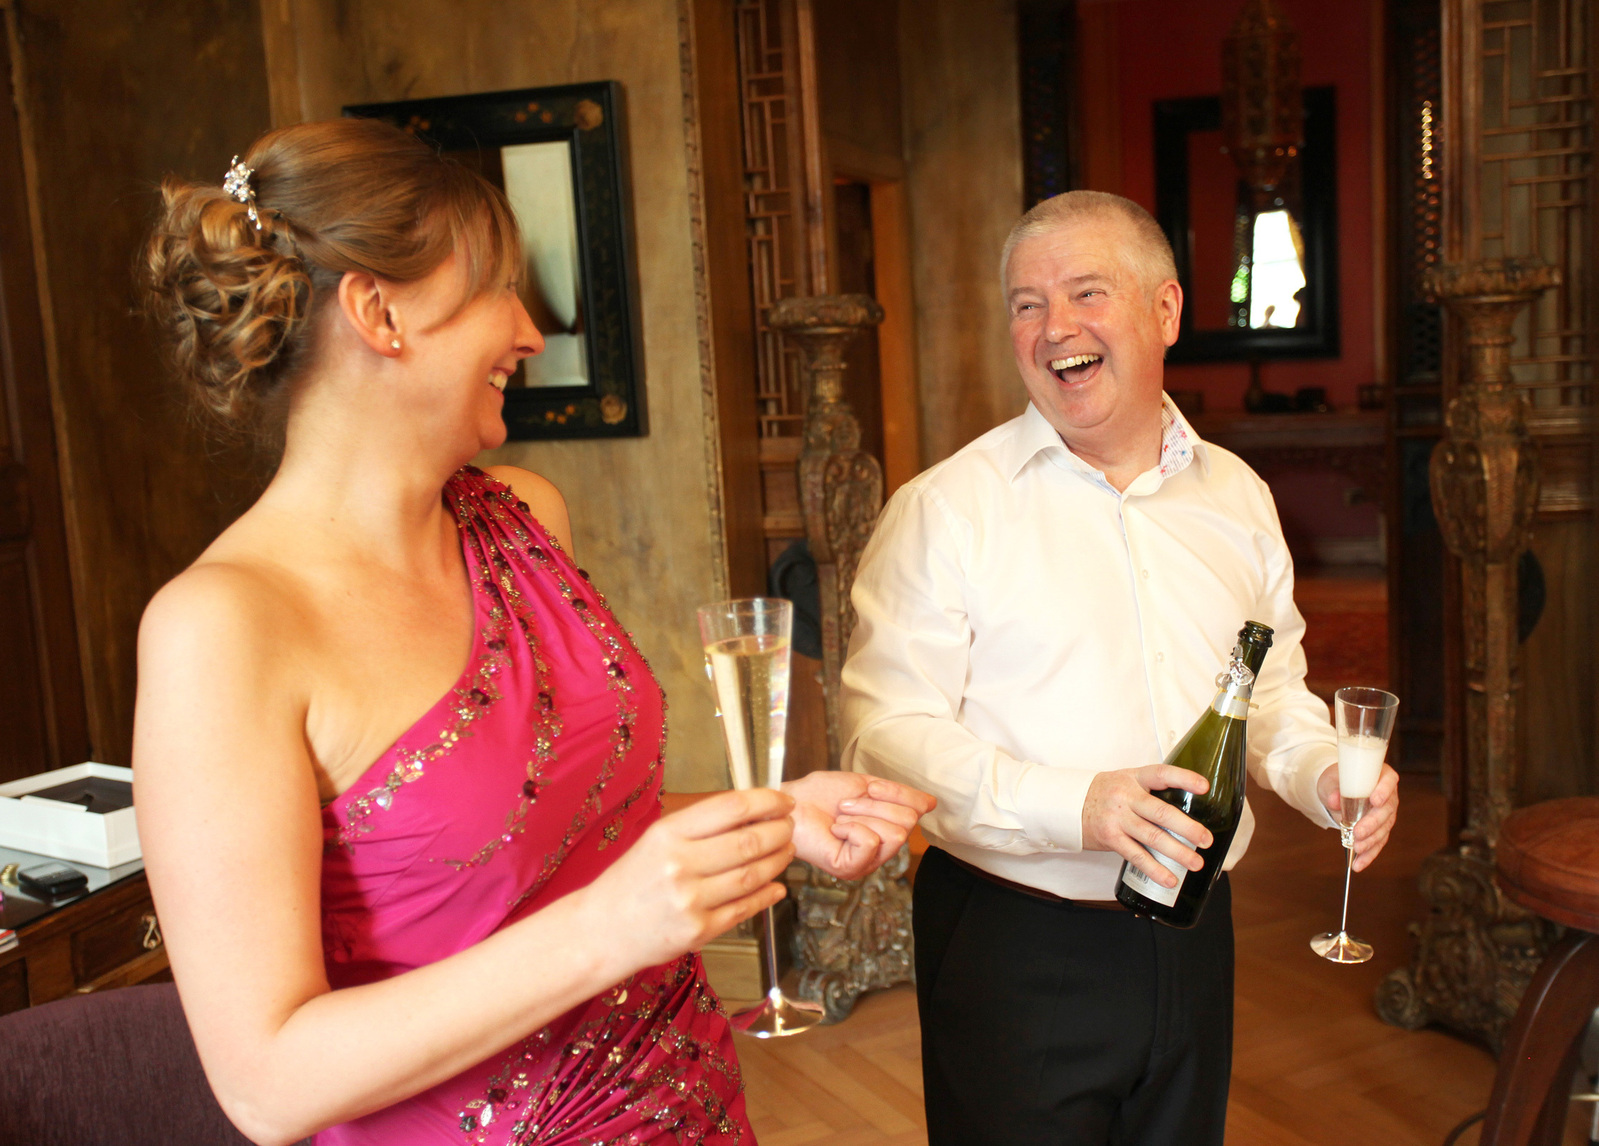 Lively fun portrait of bride and groom drinking champagne and laughing reportage style photography